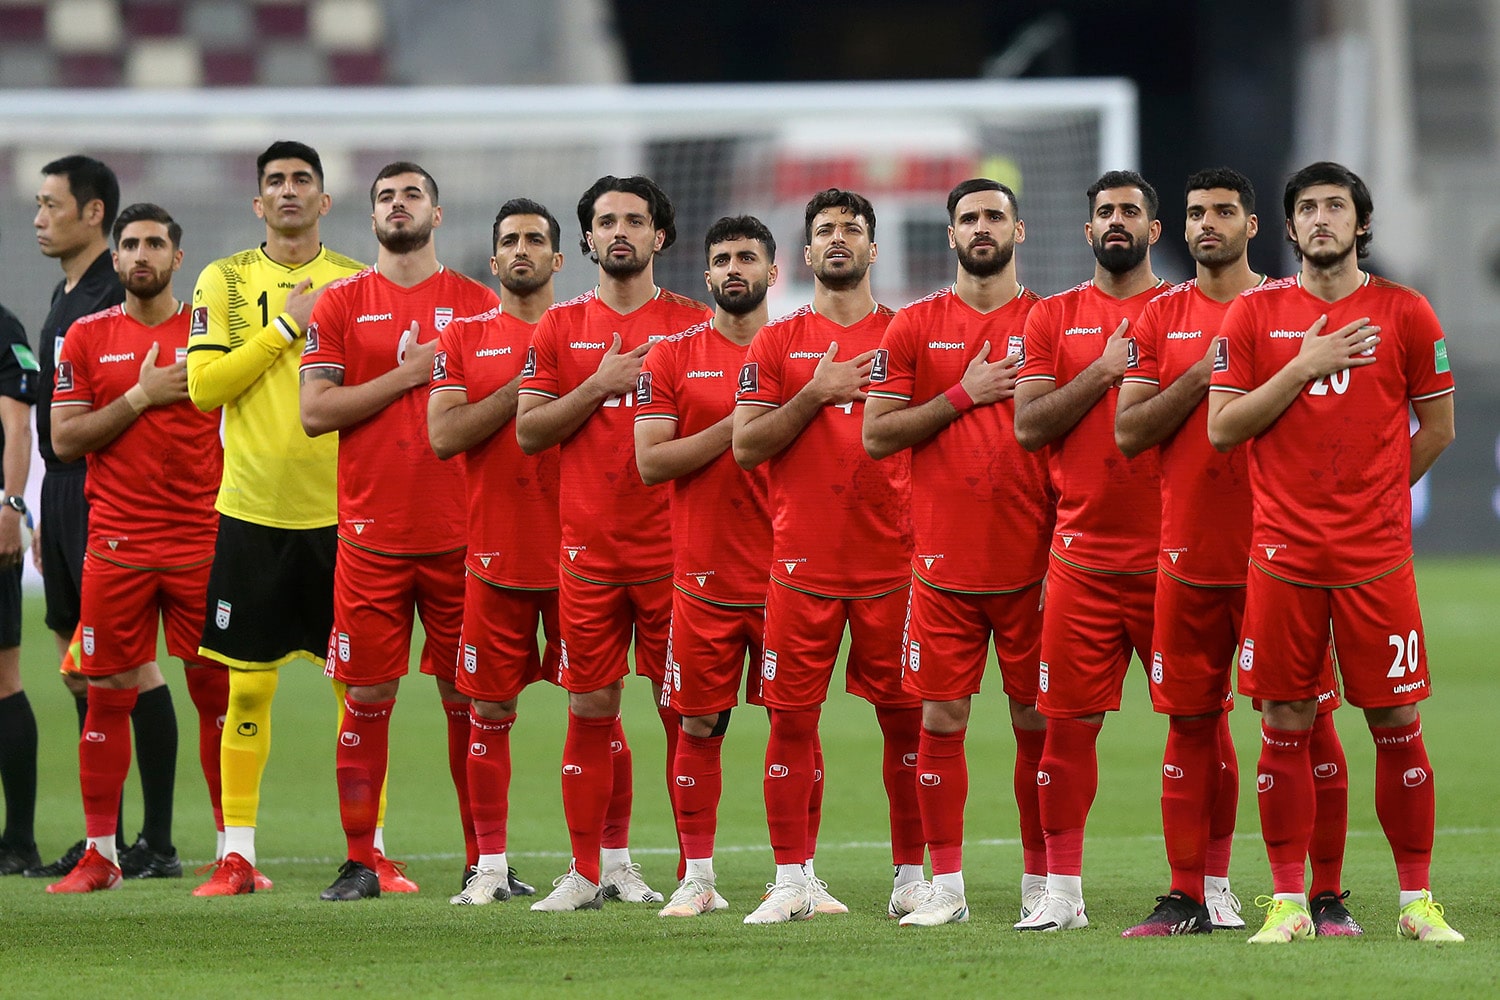 Human Rights Group Calls on FIFA to Boot Iran from World Cup